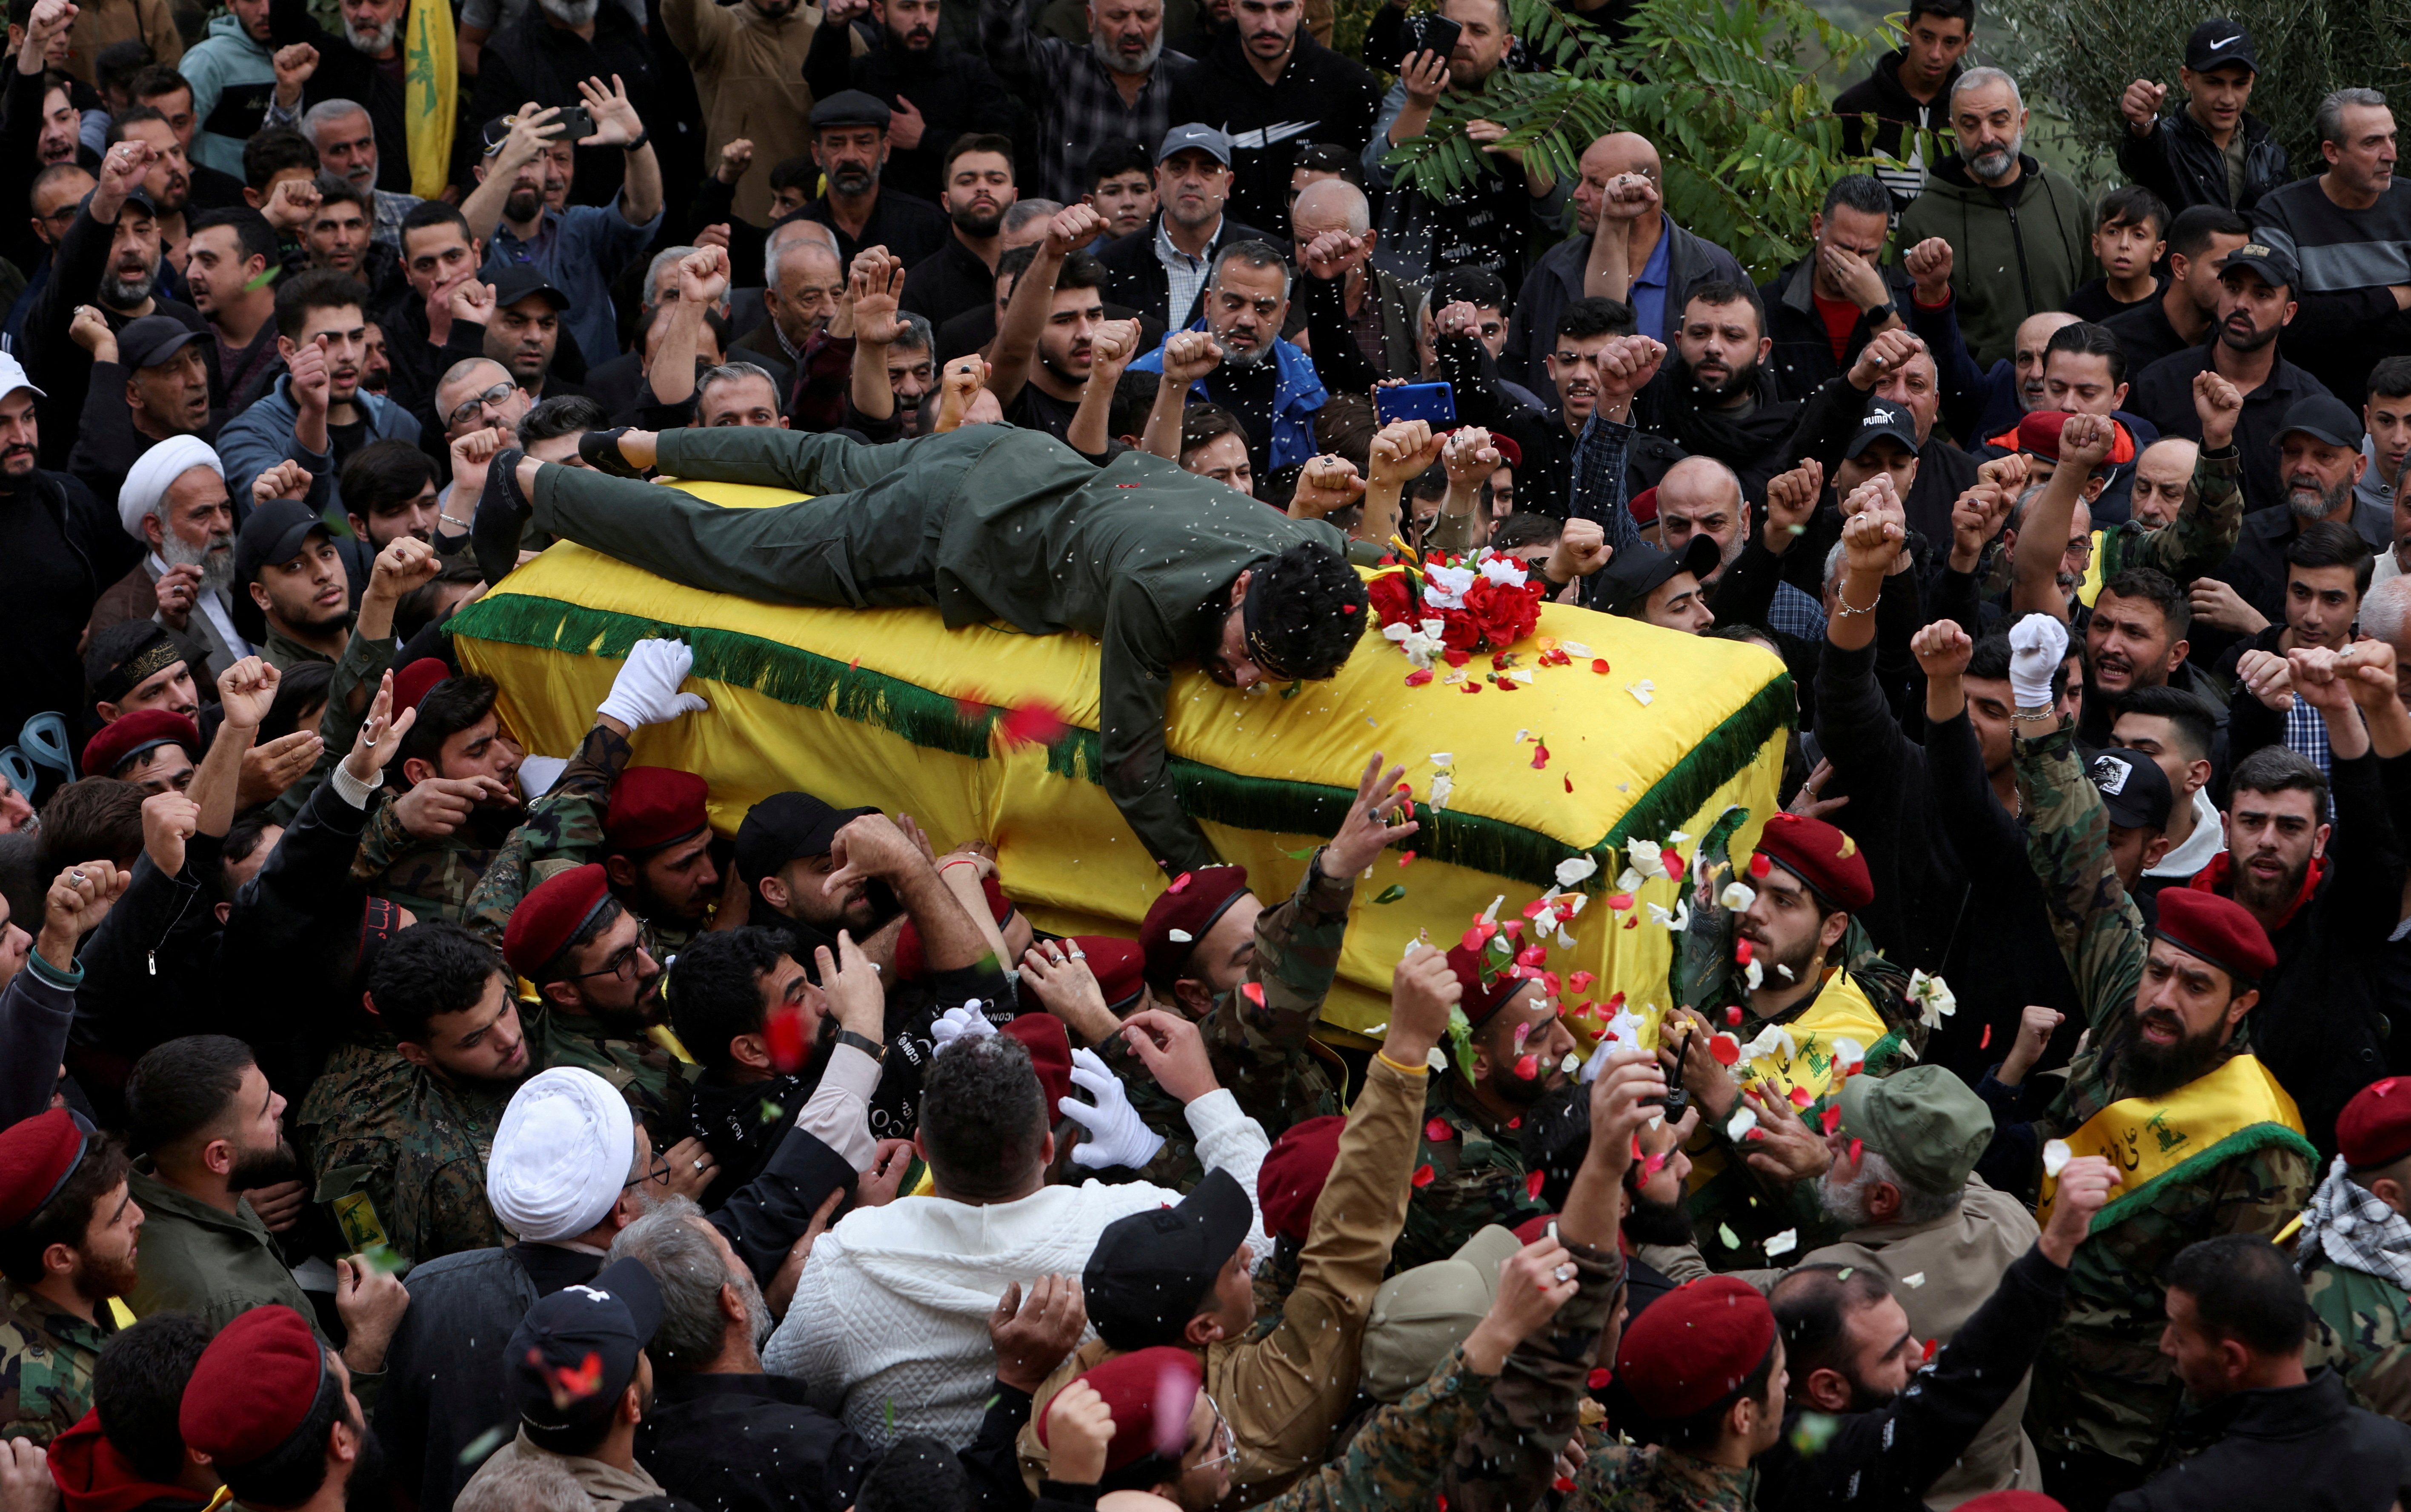 A member of Hezbollah mourns as he lies on top of the coffin of Hezbollah member Jaafar Serhan, during his funeral in Mashghara